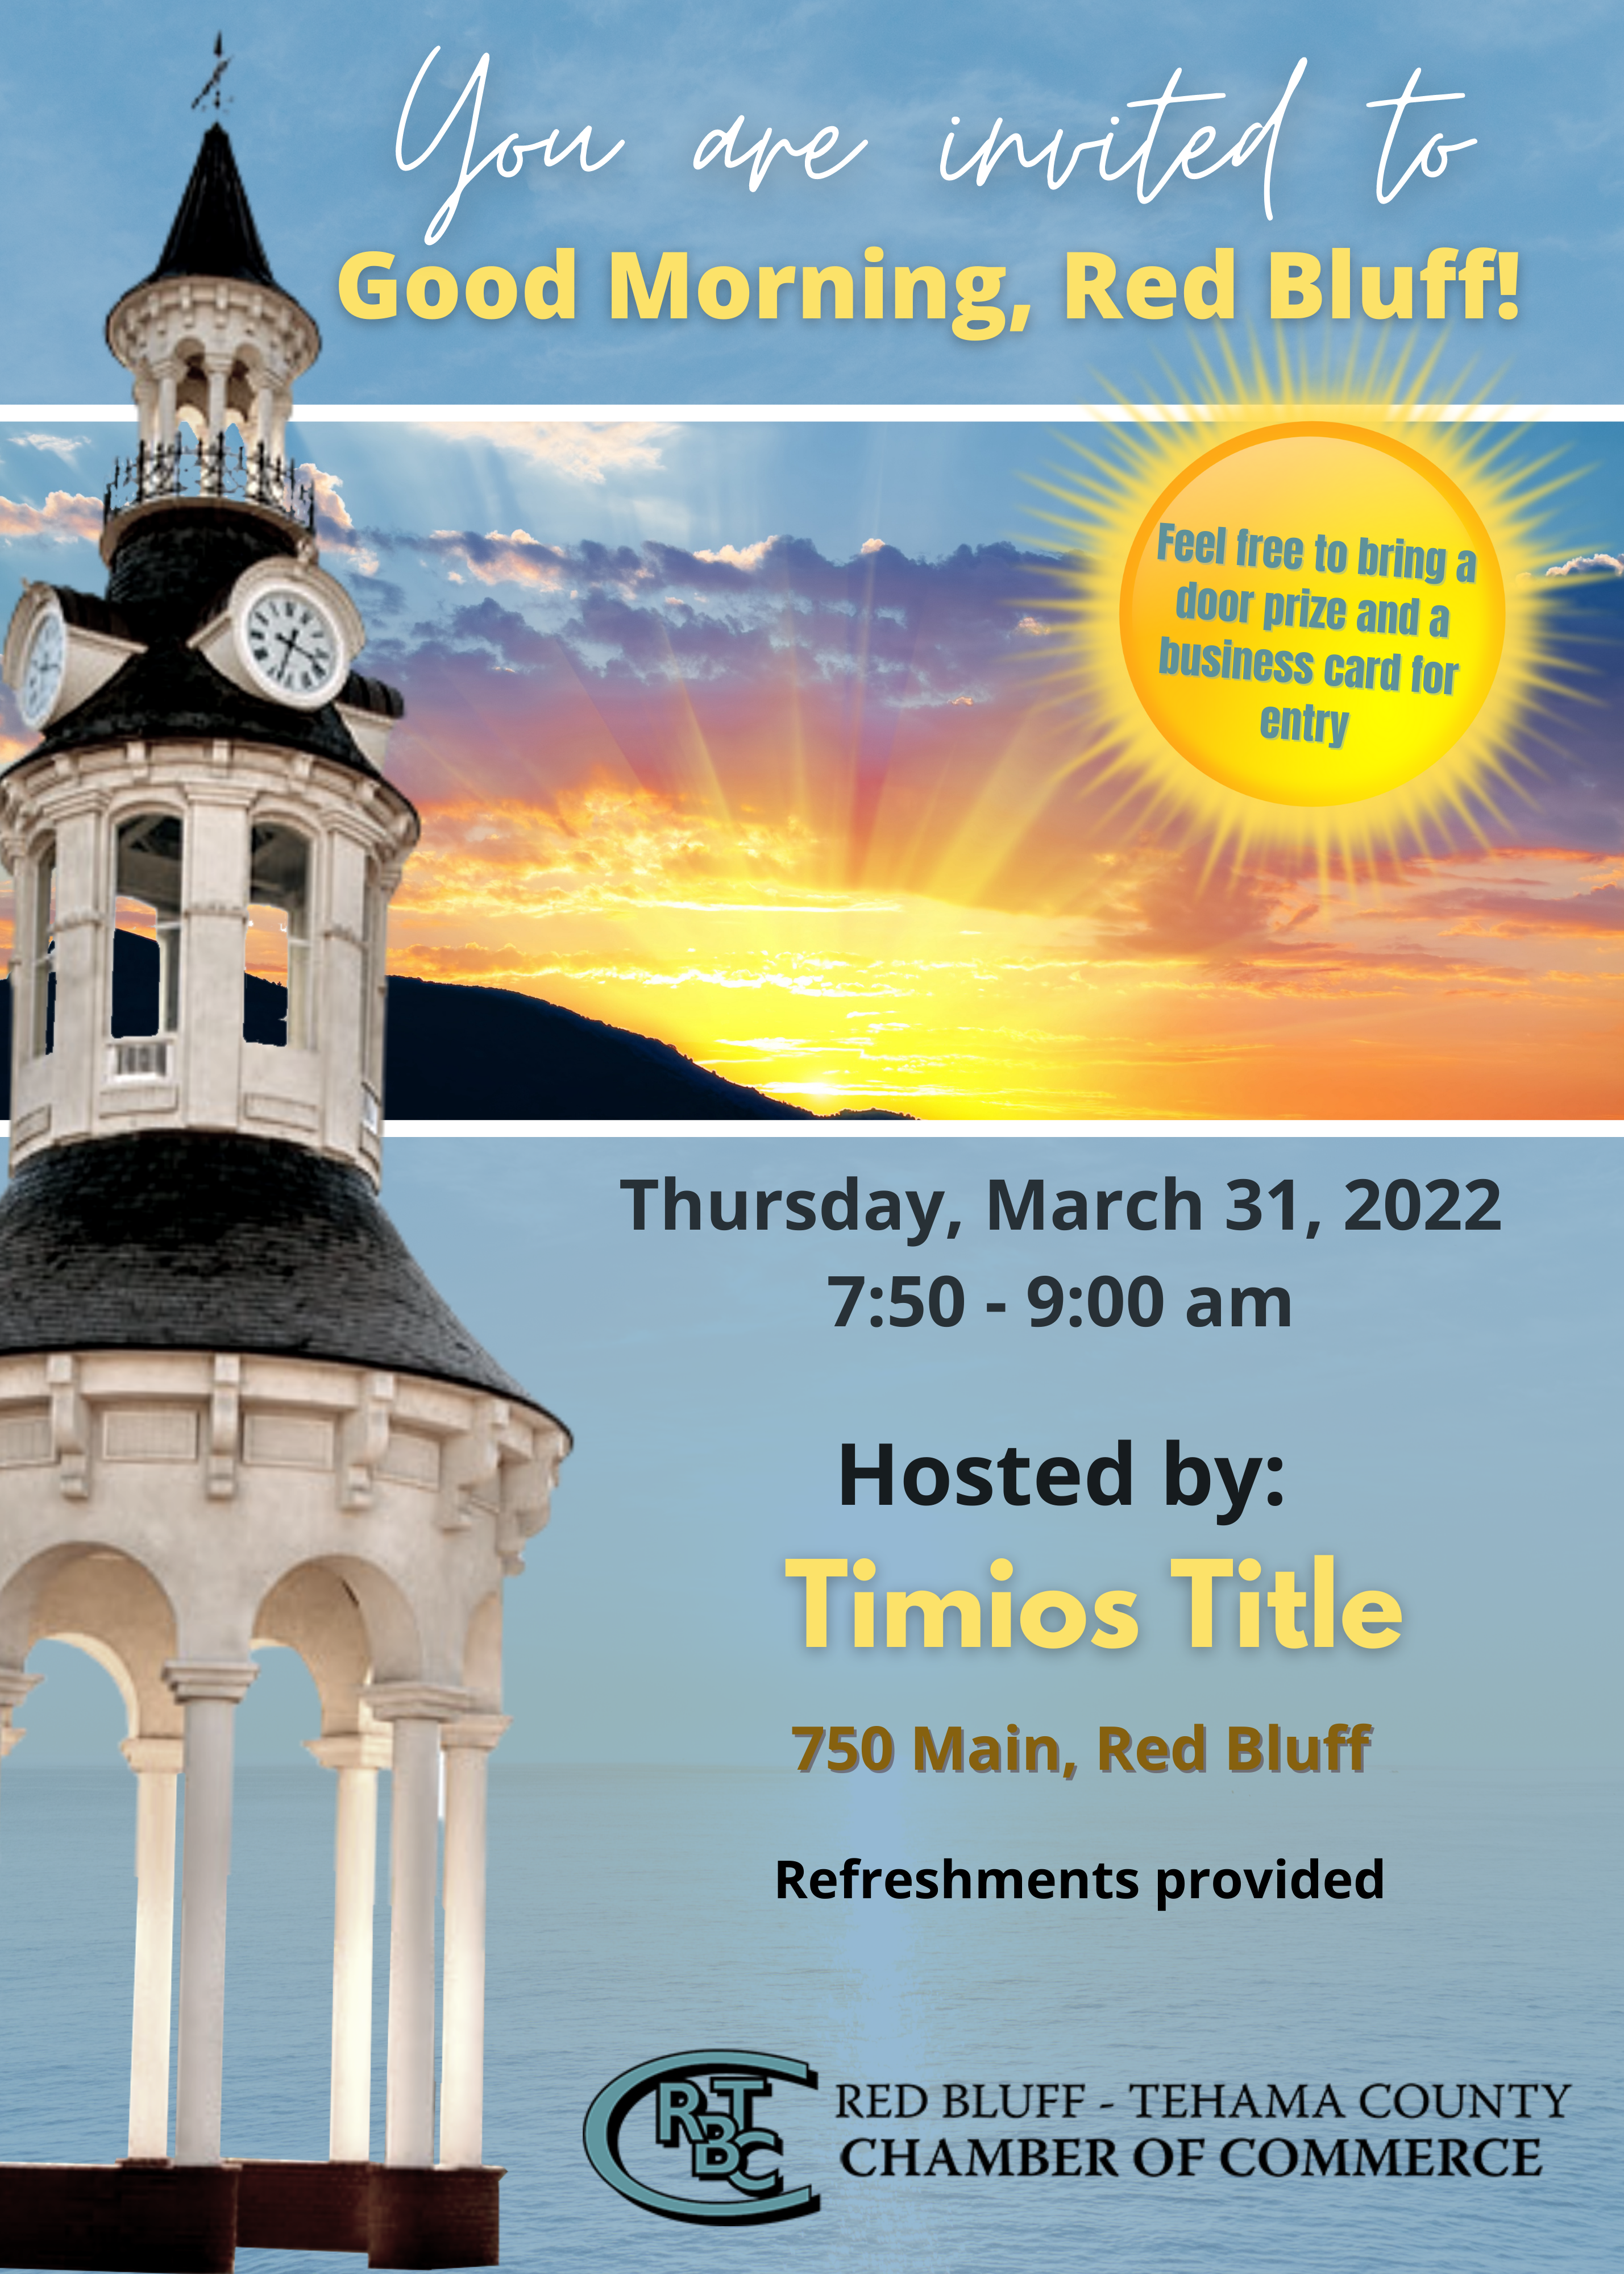 good morning red bluff at timios title on march 31st 2022